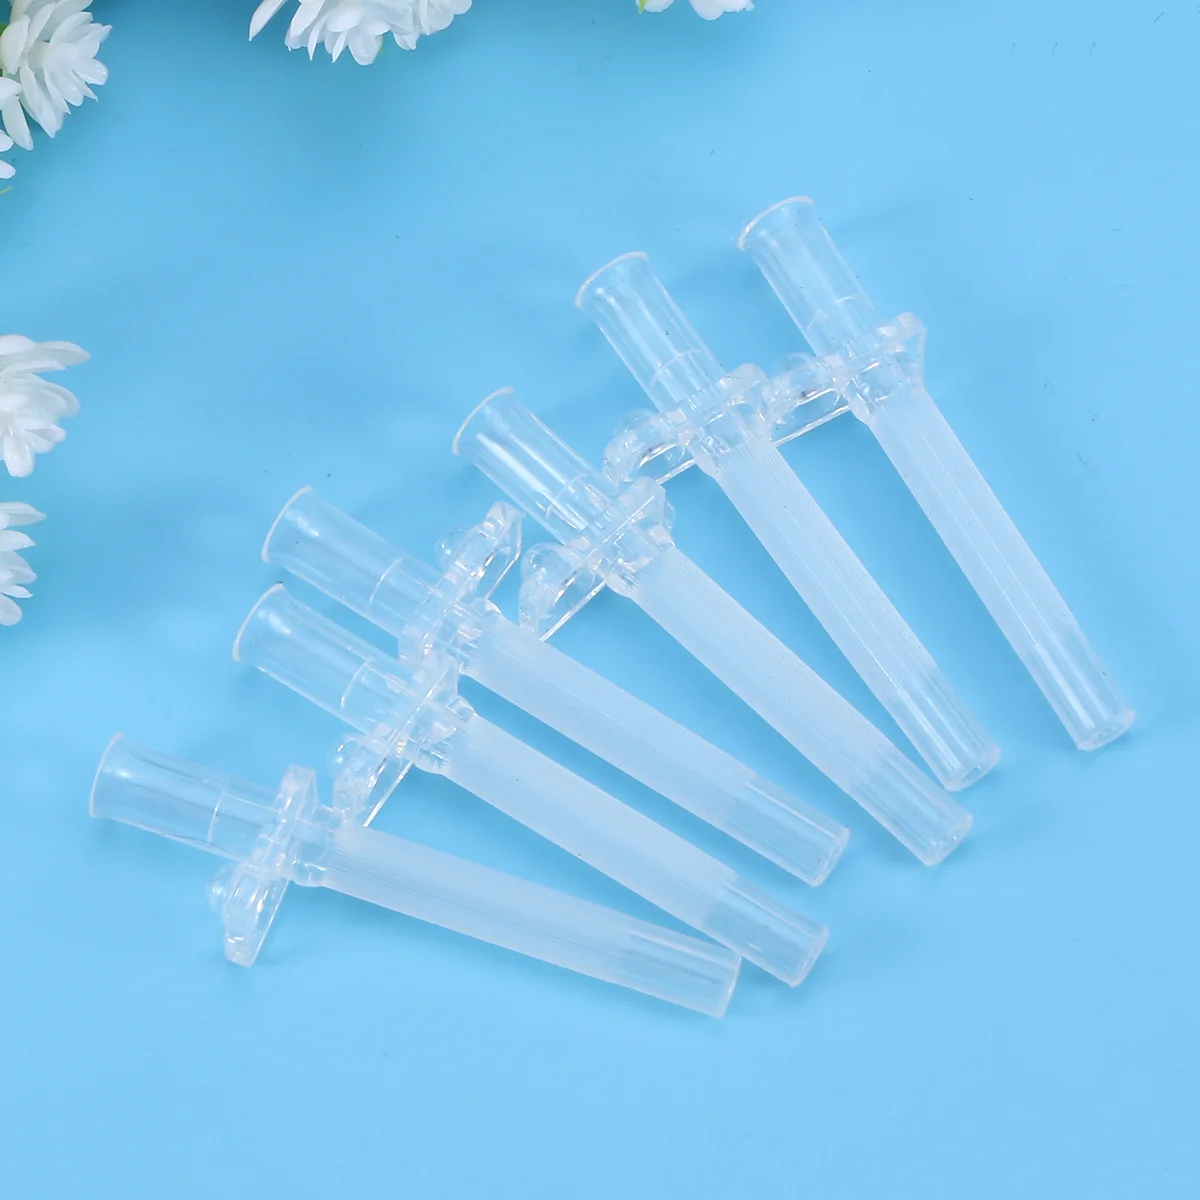 

6pcs Universal Water Bottle Drinking Nozzles Straws Silicone Replacement Bottle Nozzles